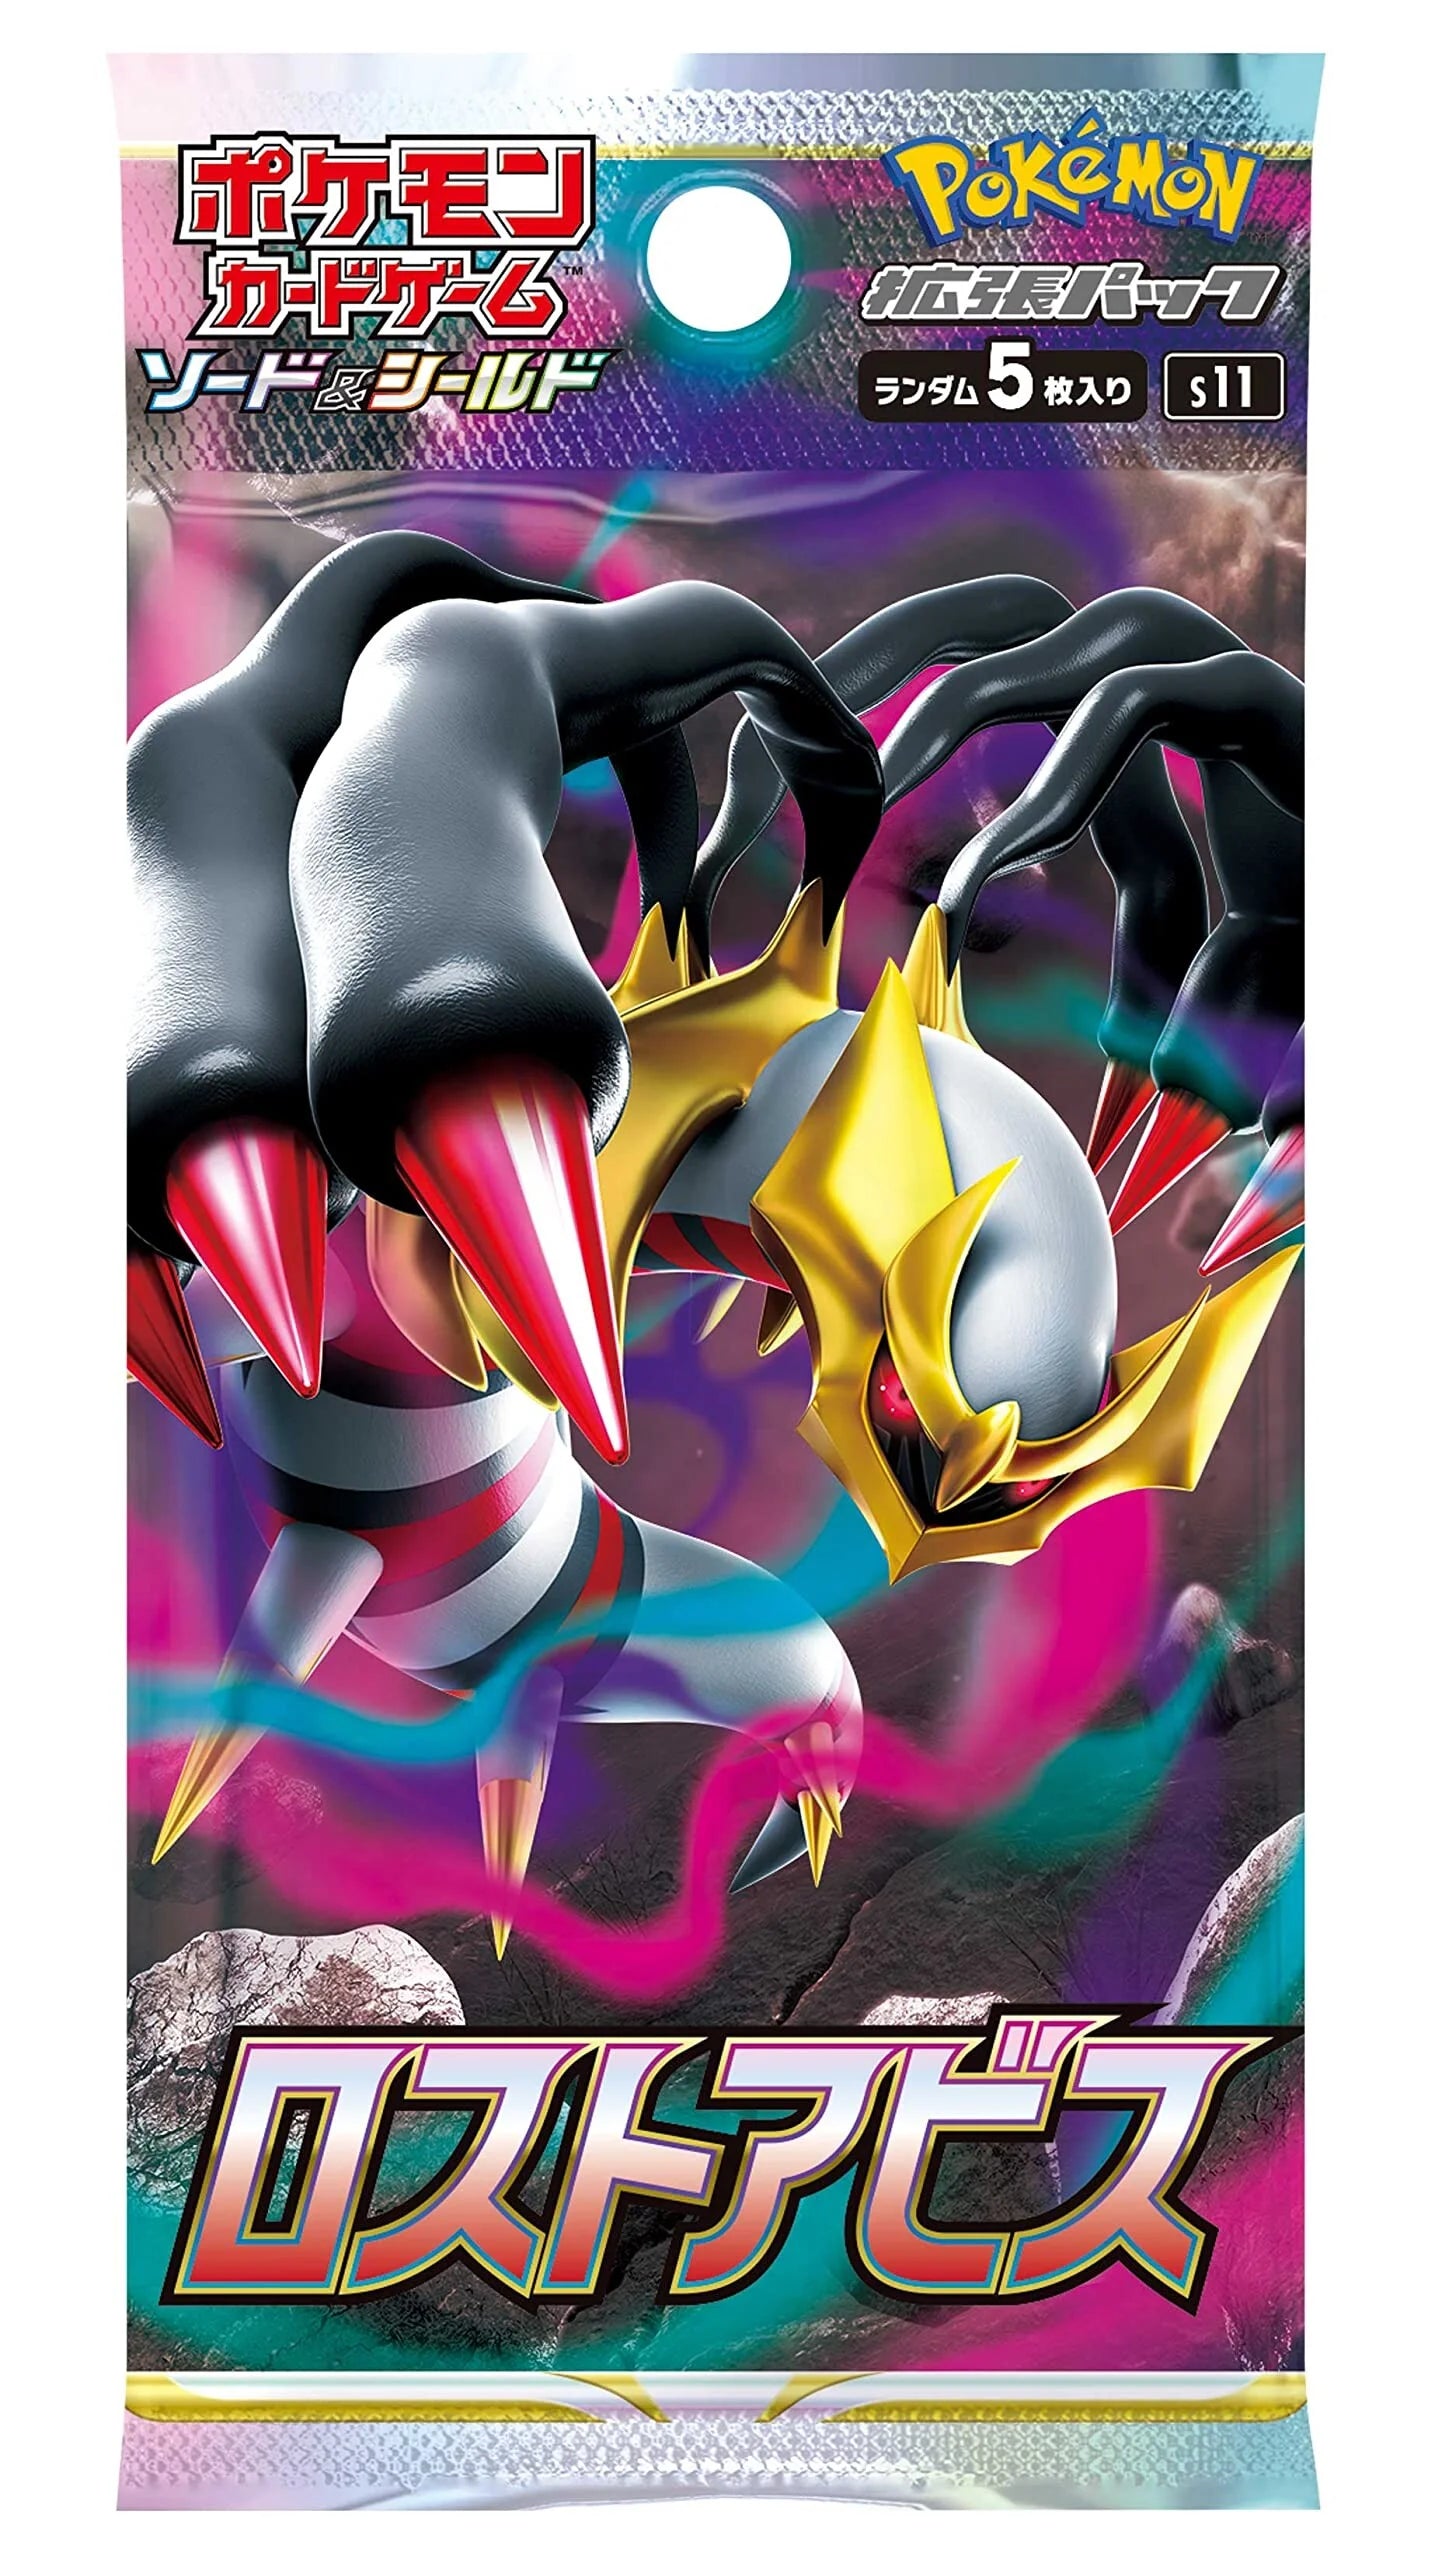 Japanese Pokémon - s11 - Lost Abyss (Lost Origin): Sword & Shield 11 Booster Packs & Boxes